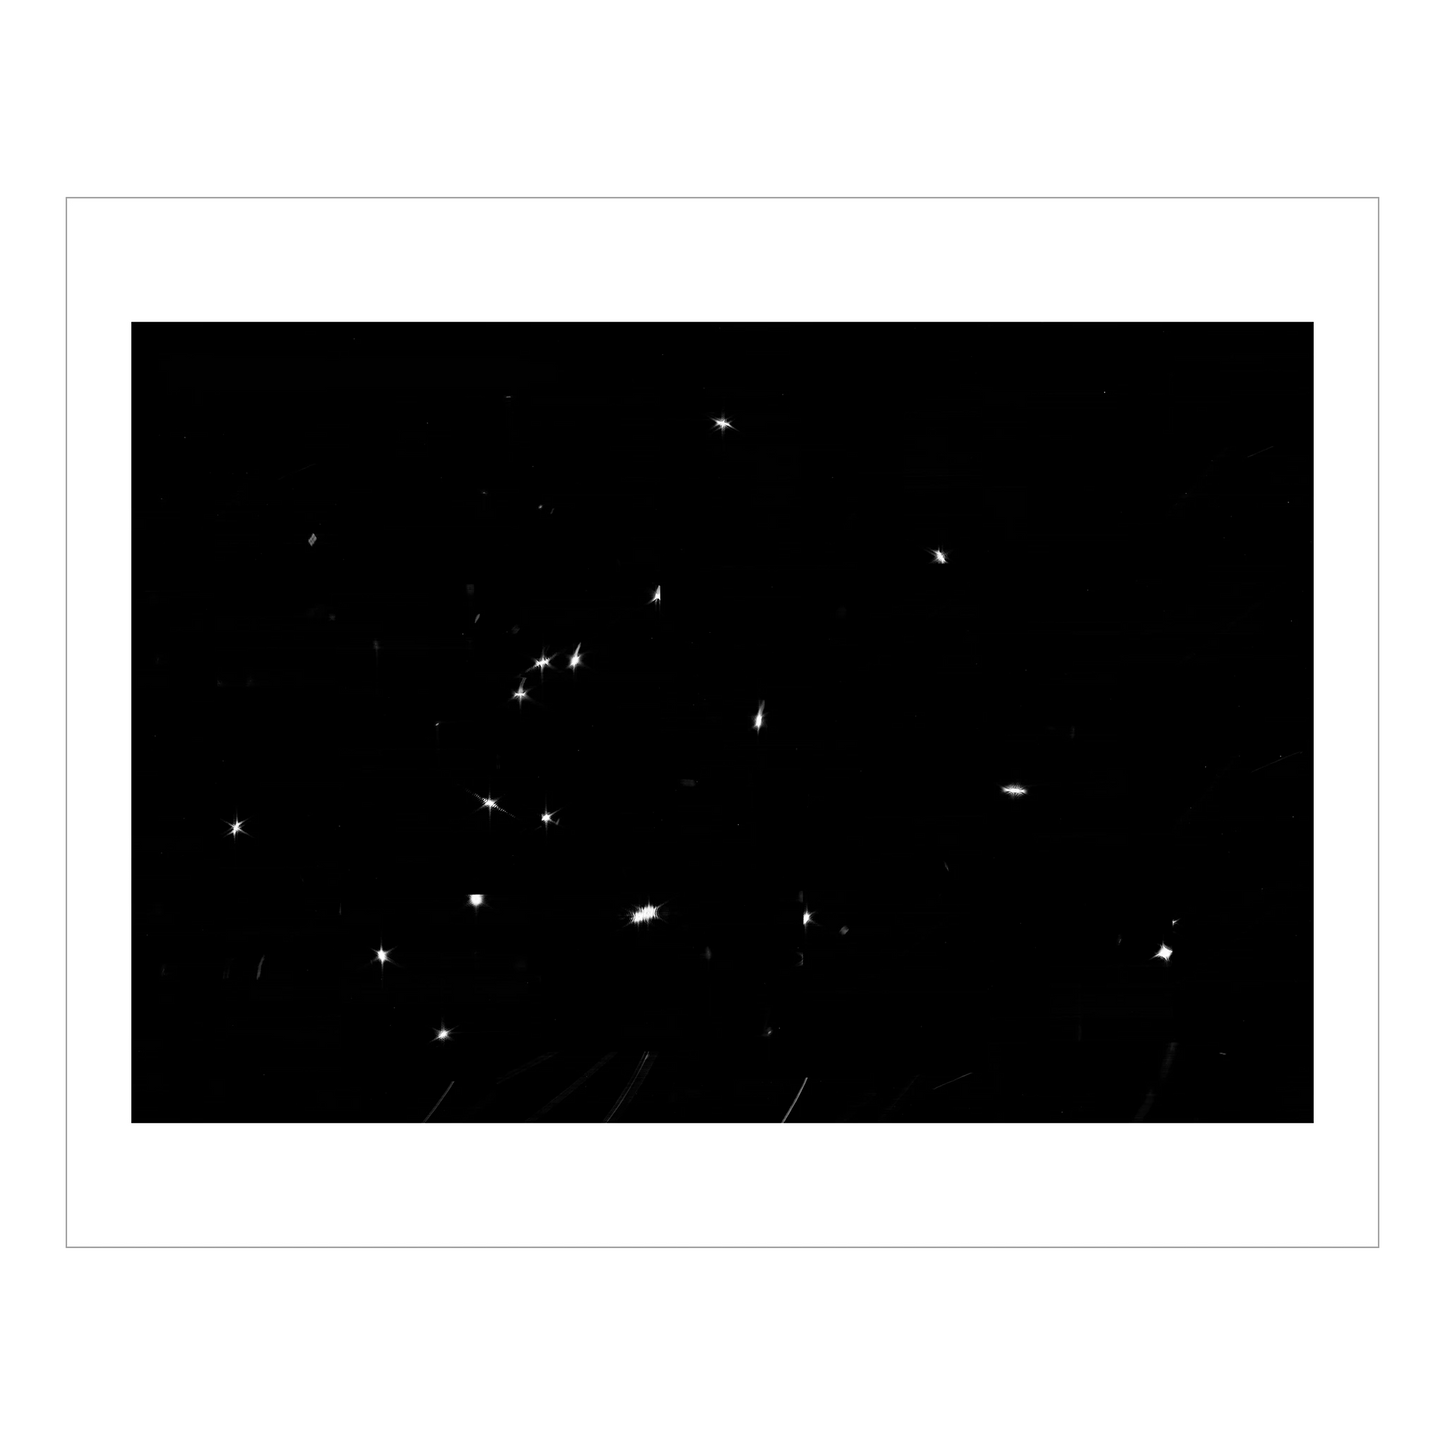 An isolated star (HD 84406) is randomly repeated 18 times, once by each of the still unaligned mirror segments.